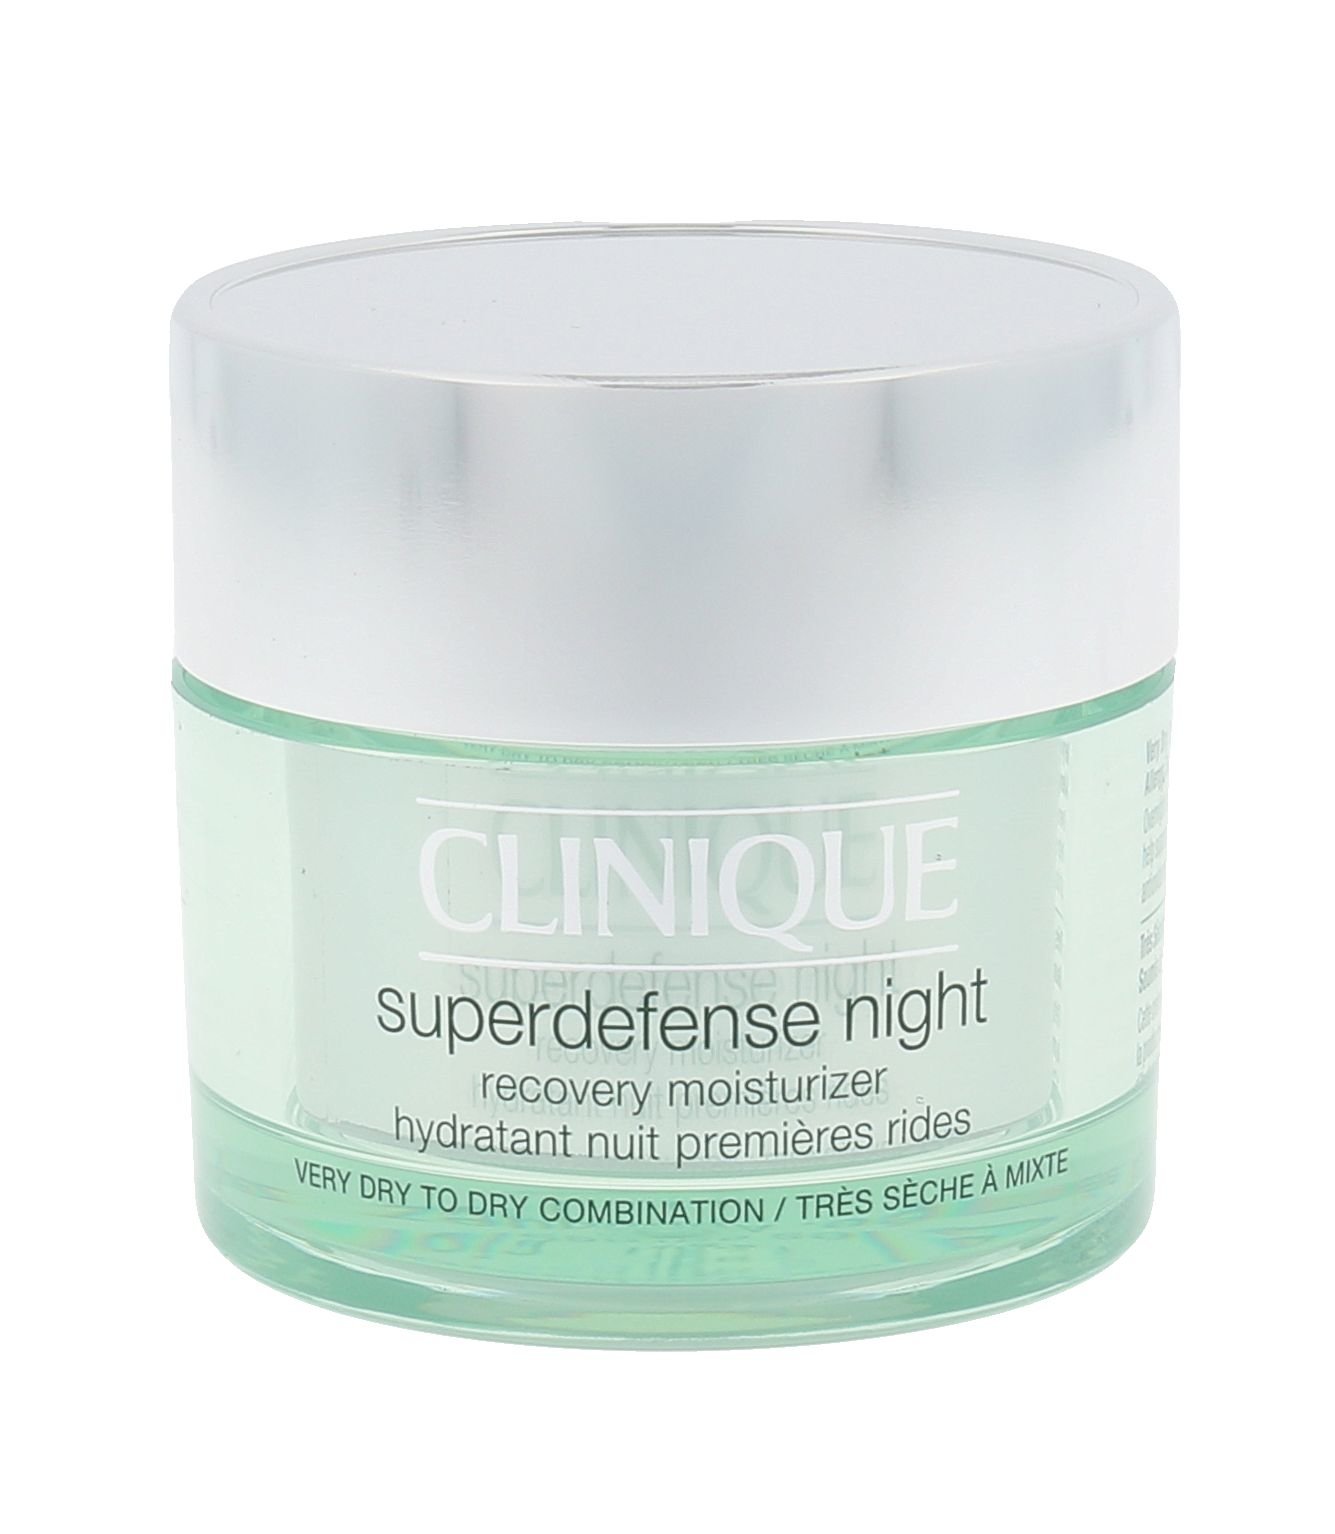 Clinique Superdefense Night Recovery Moisturizer Dry Skin